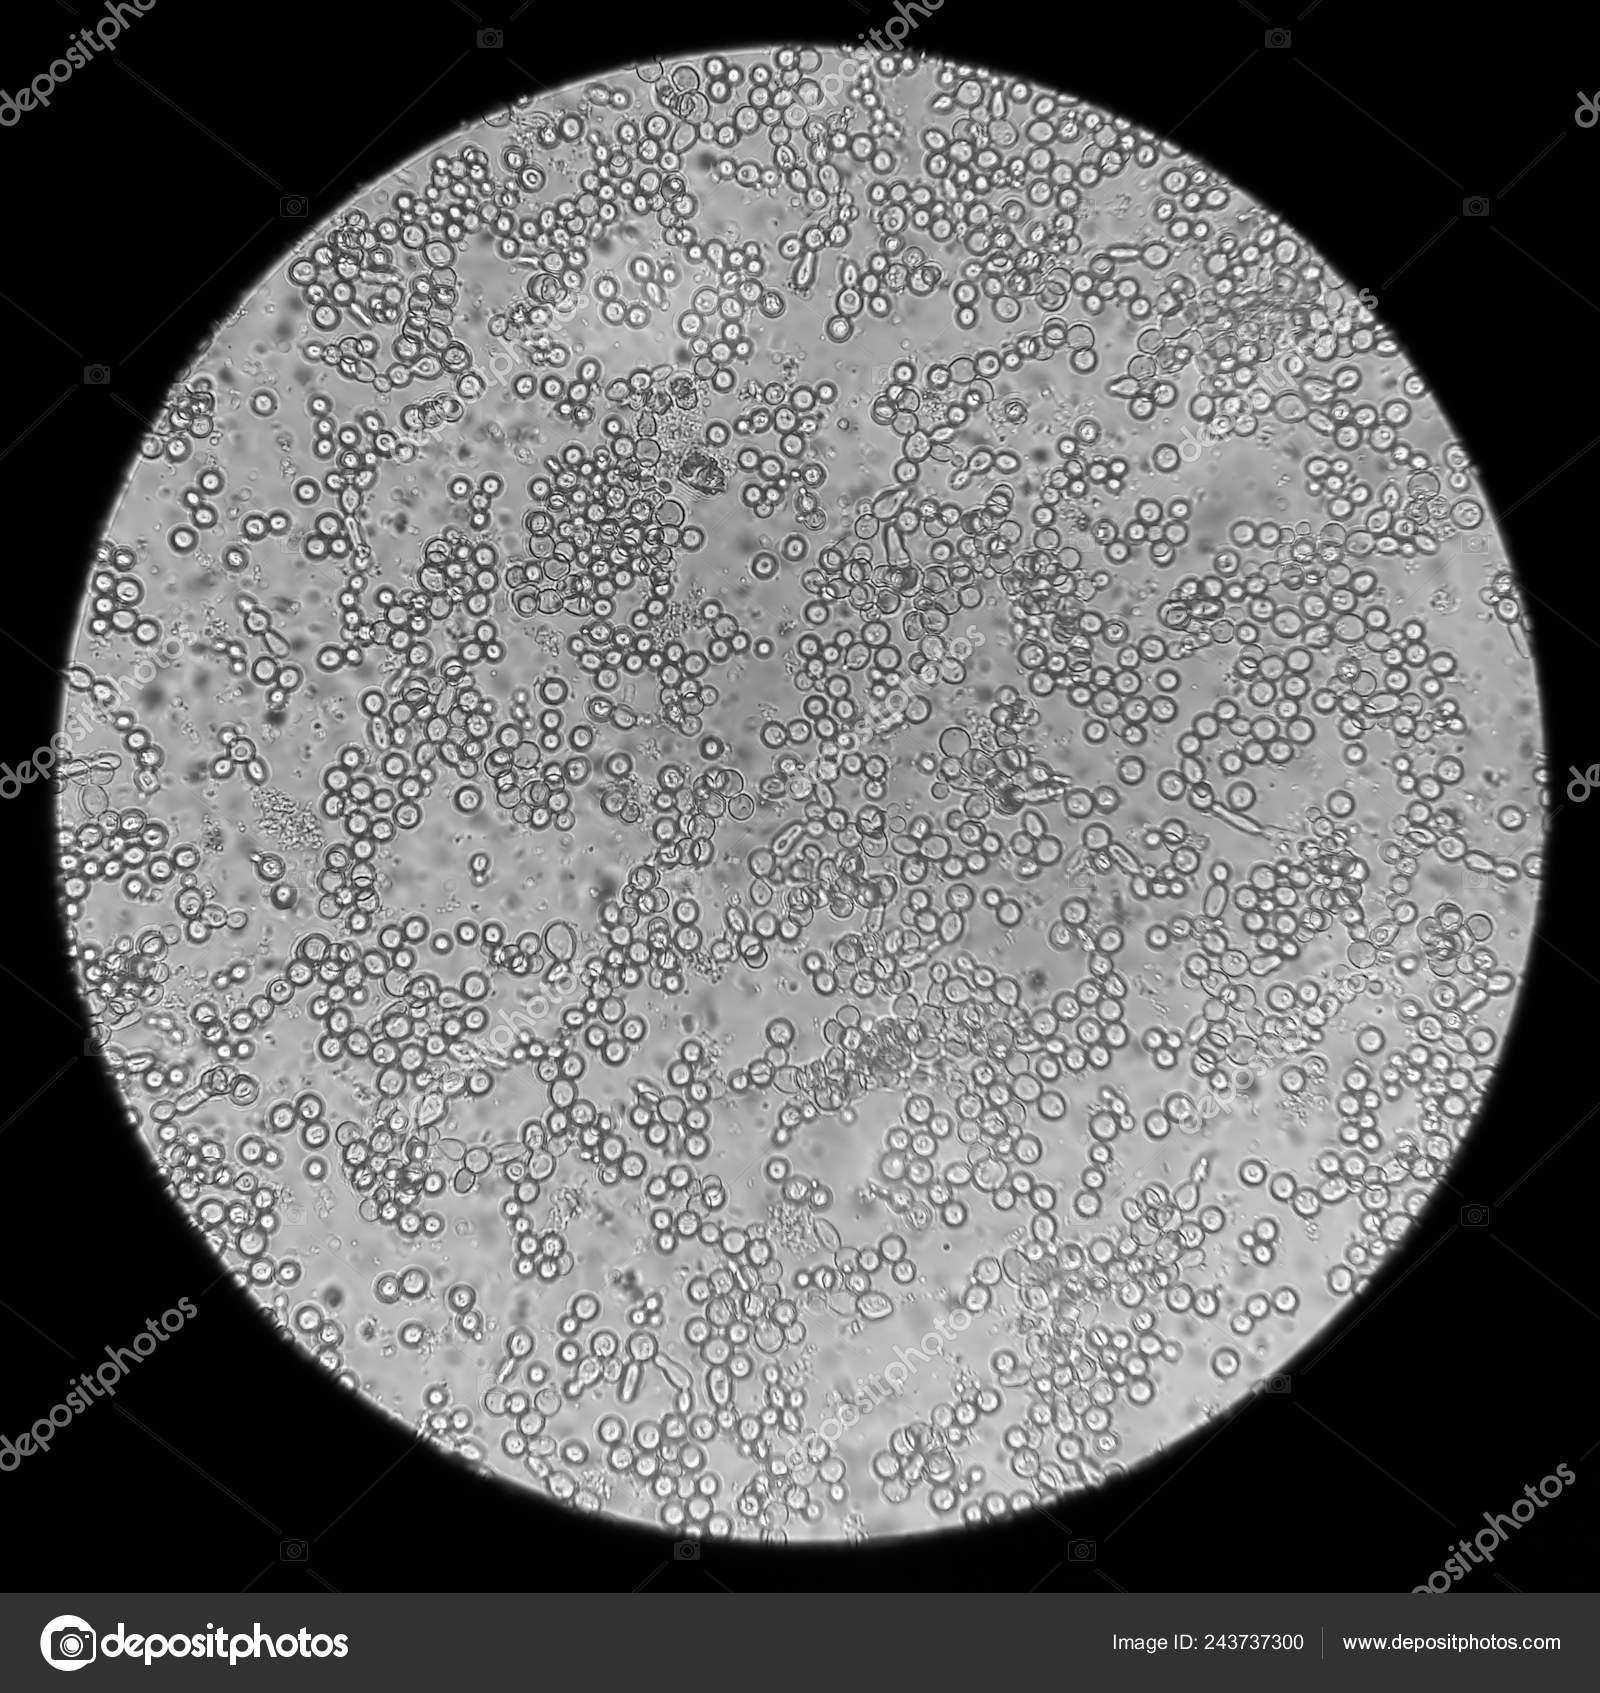 Candida Albicans Microscopic Appearance